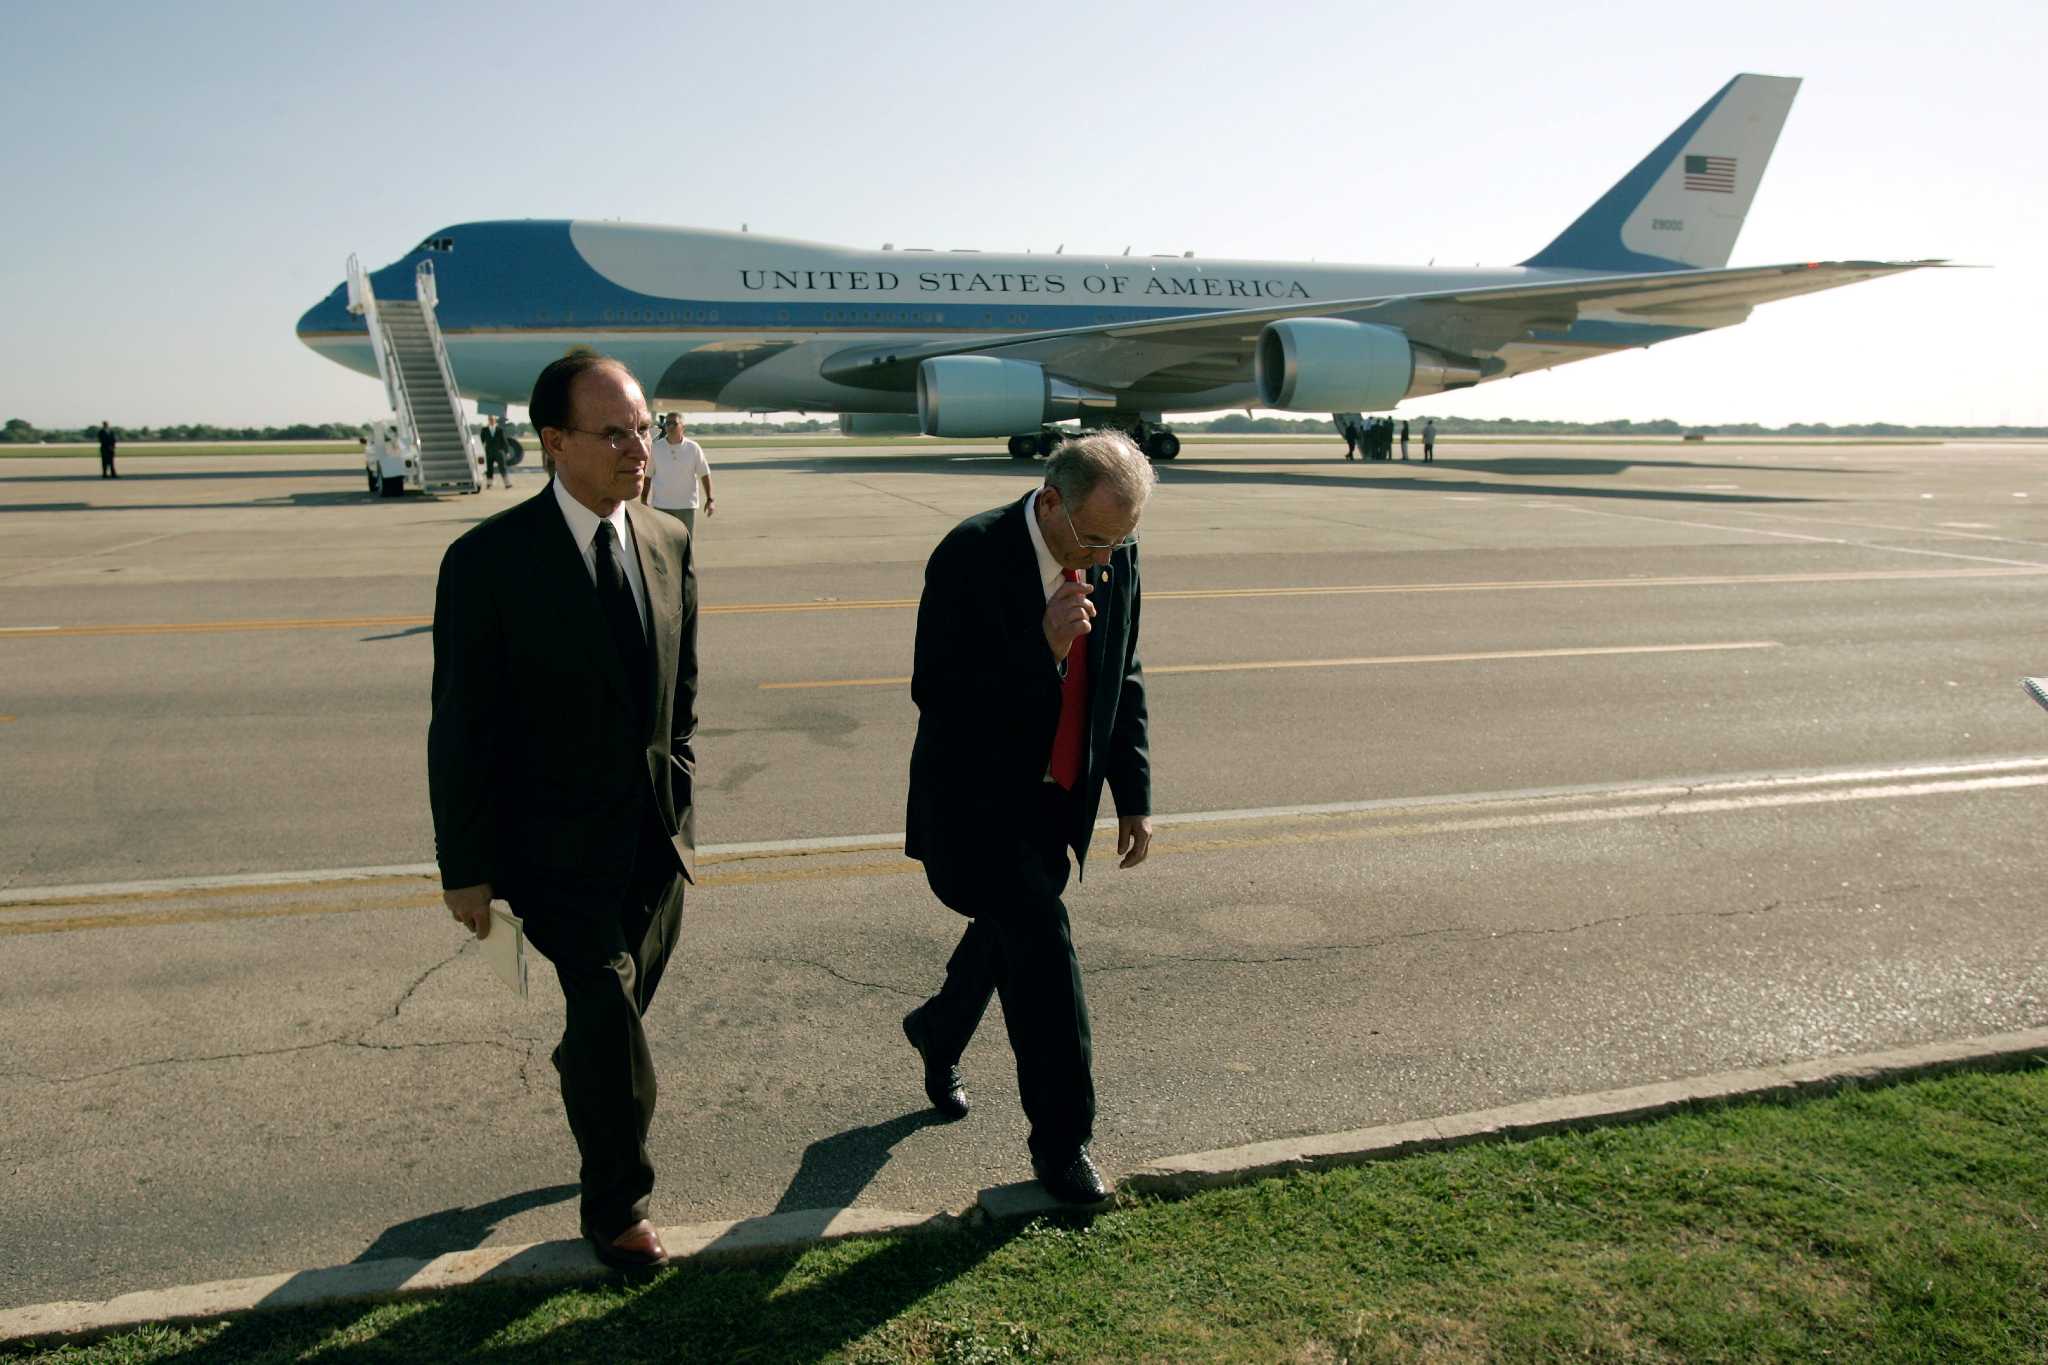 Tequila bottles found on new Air Force One in development in San Antonio,  report says